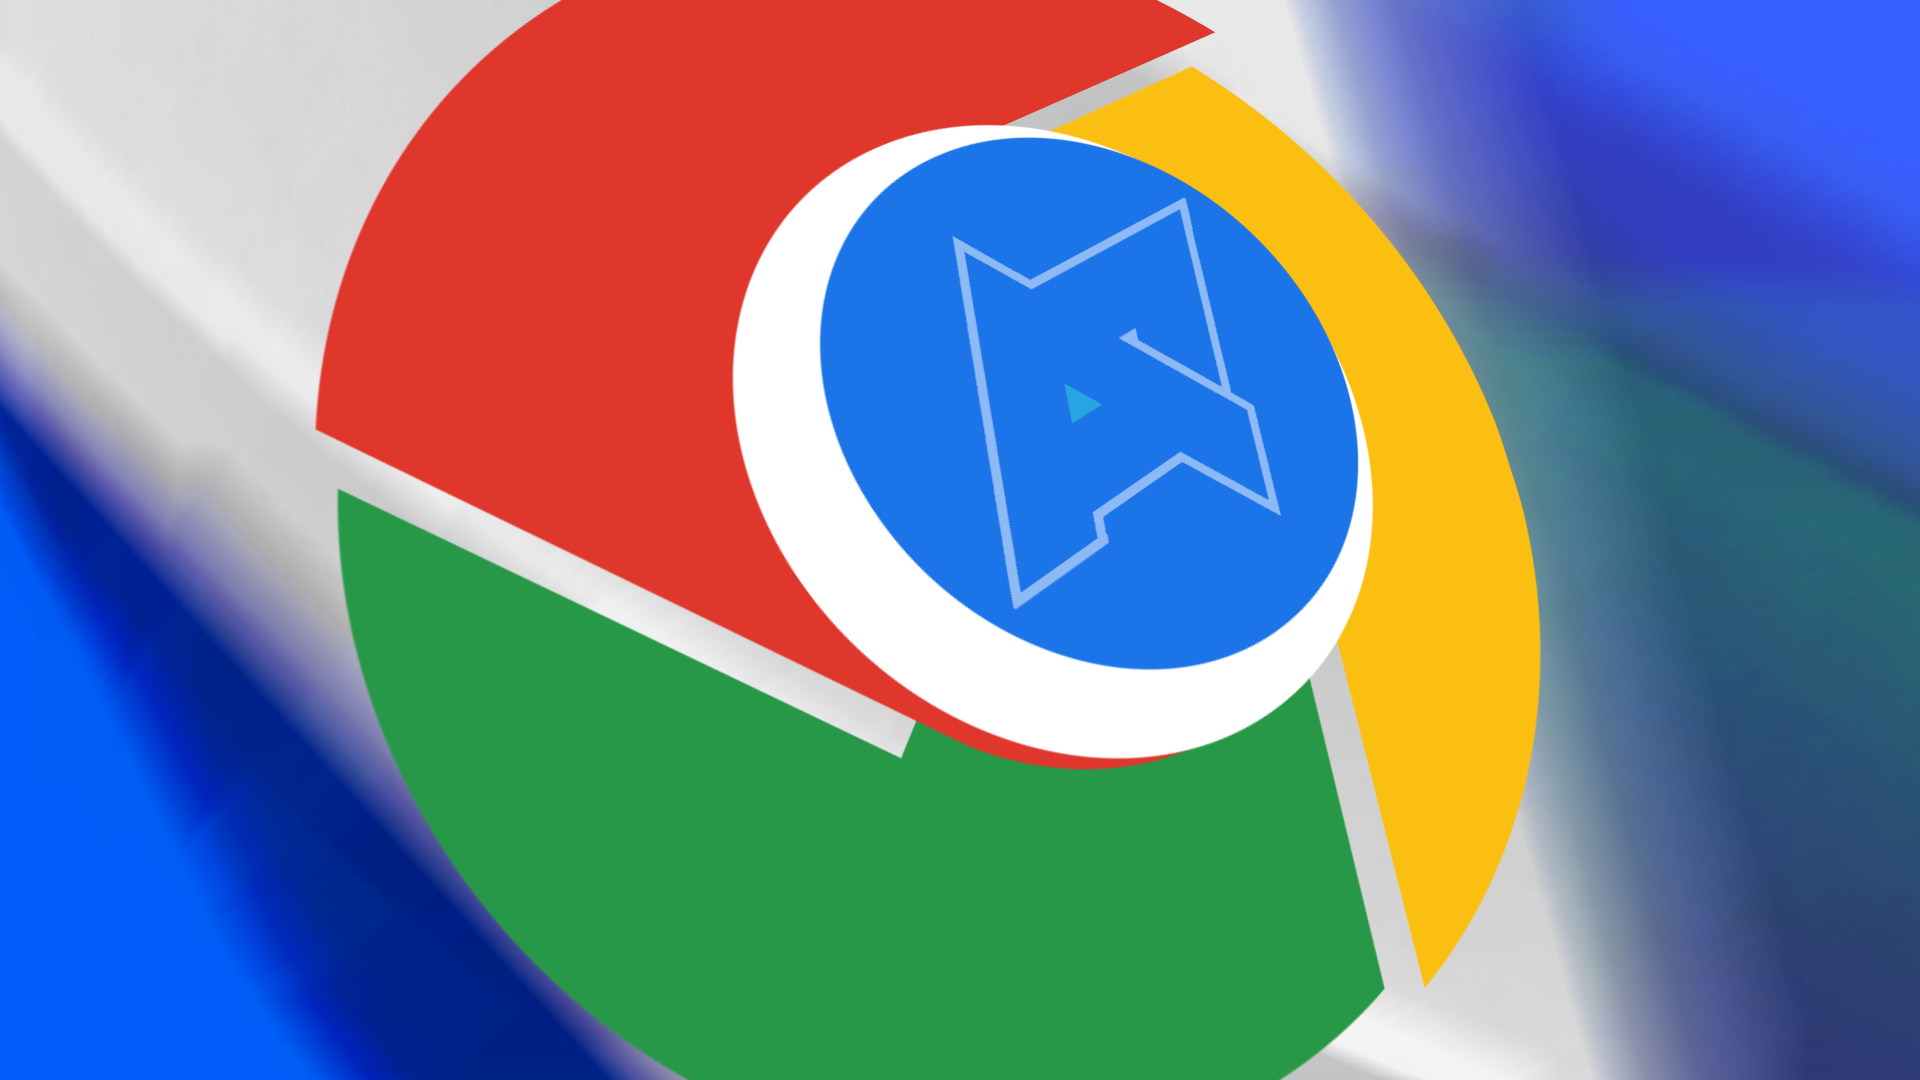 Google has fixed a zero-day vulnerability in Chrome for the eighth time this year